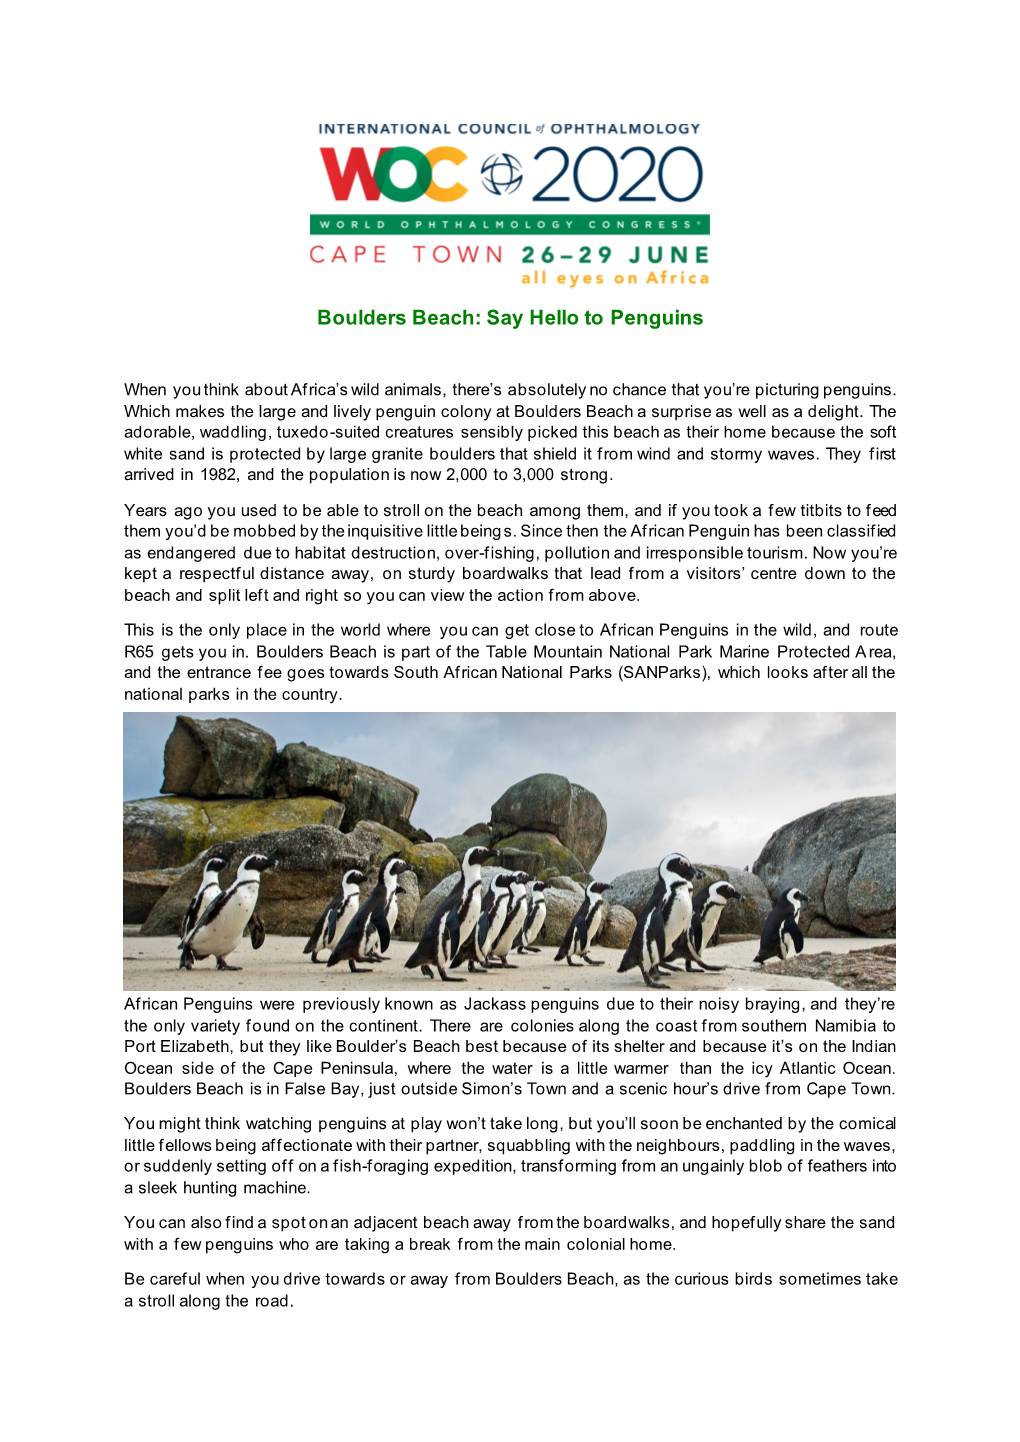 Boulders Beach: Say Hello to Penguins